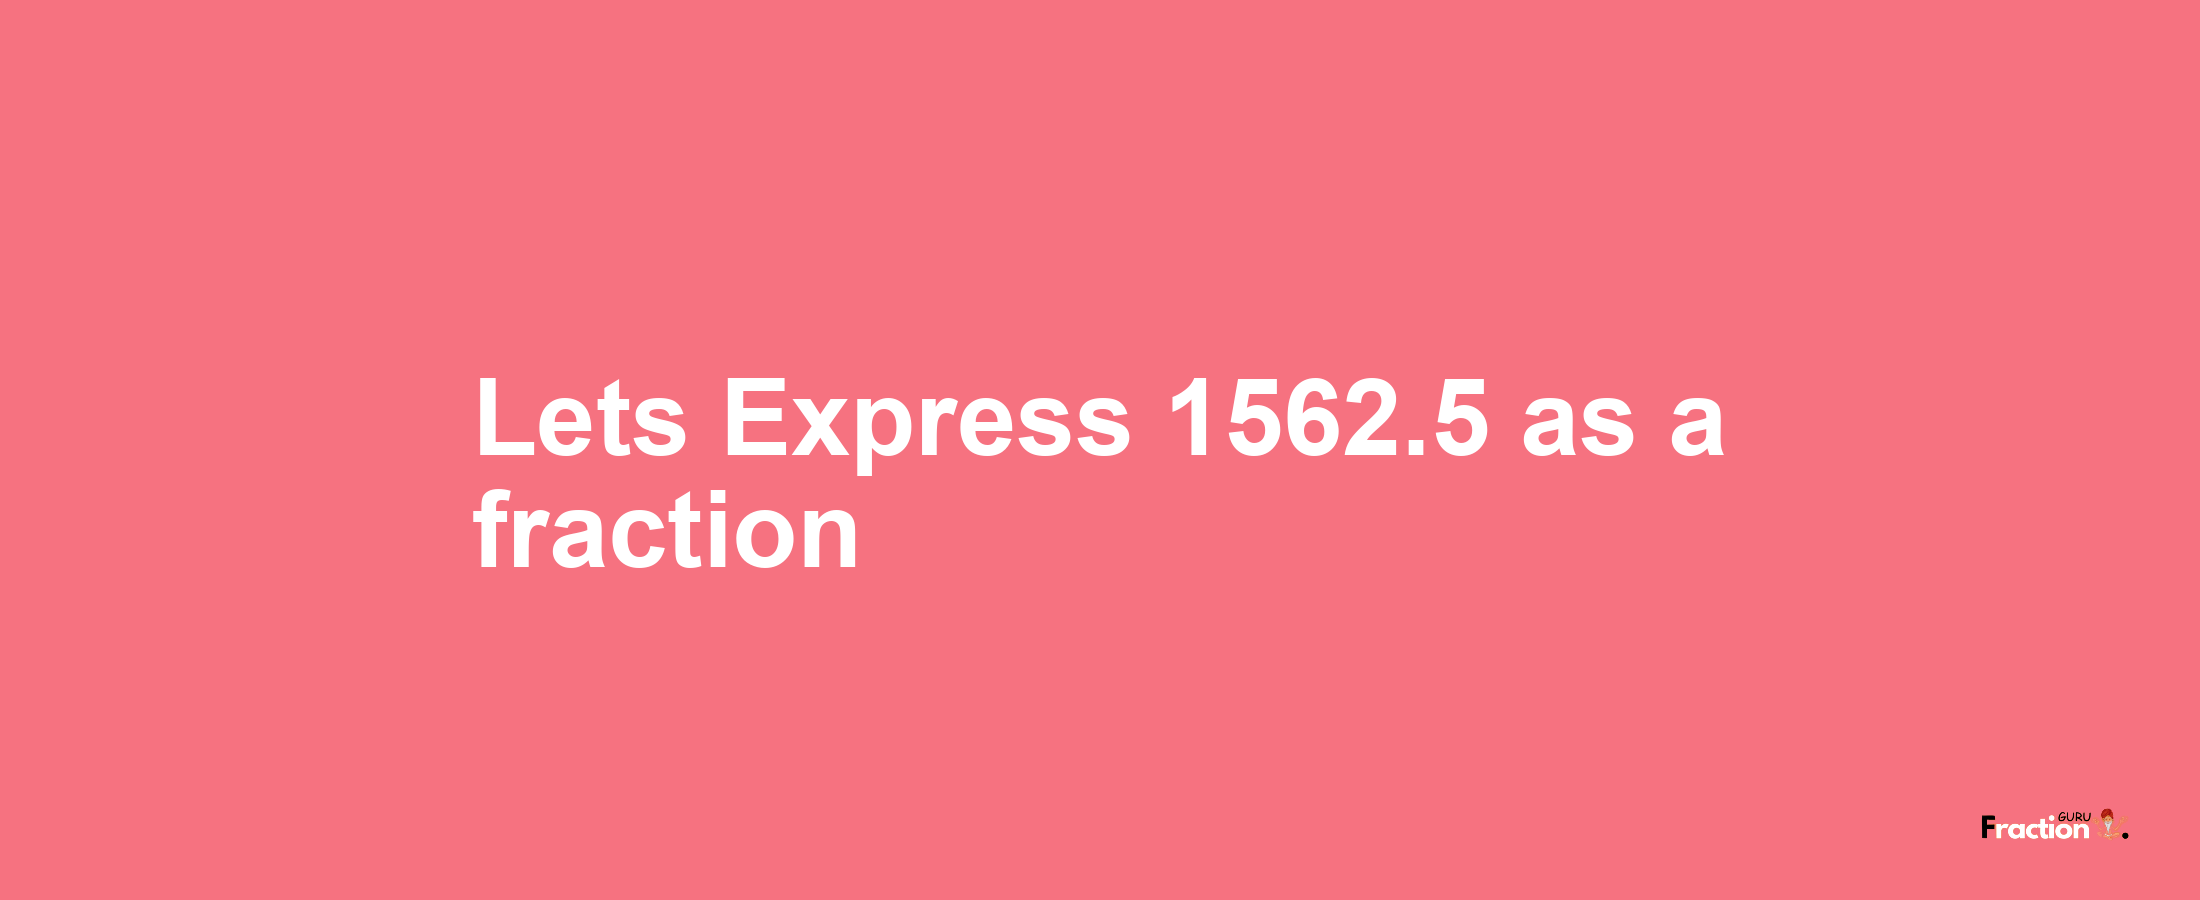 Lets Express 1562.5 as afraction